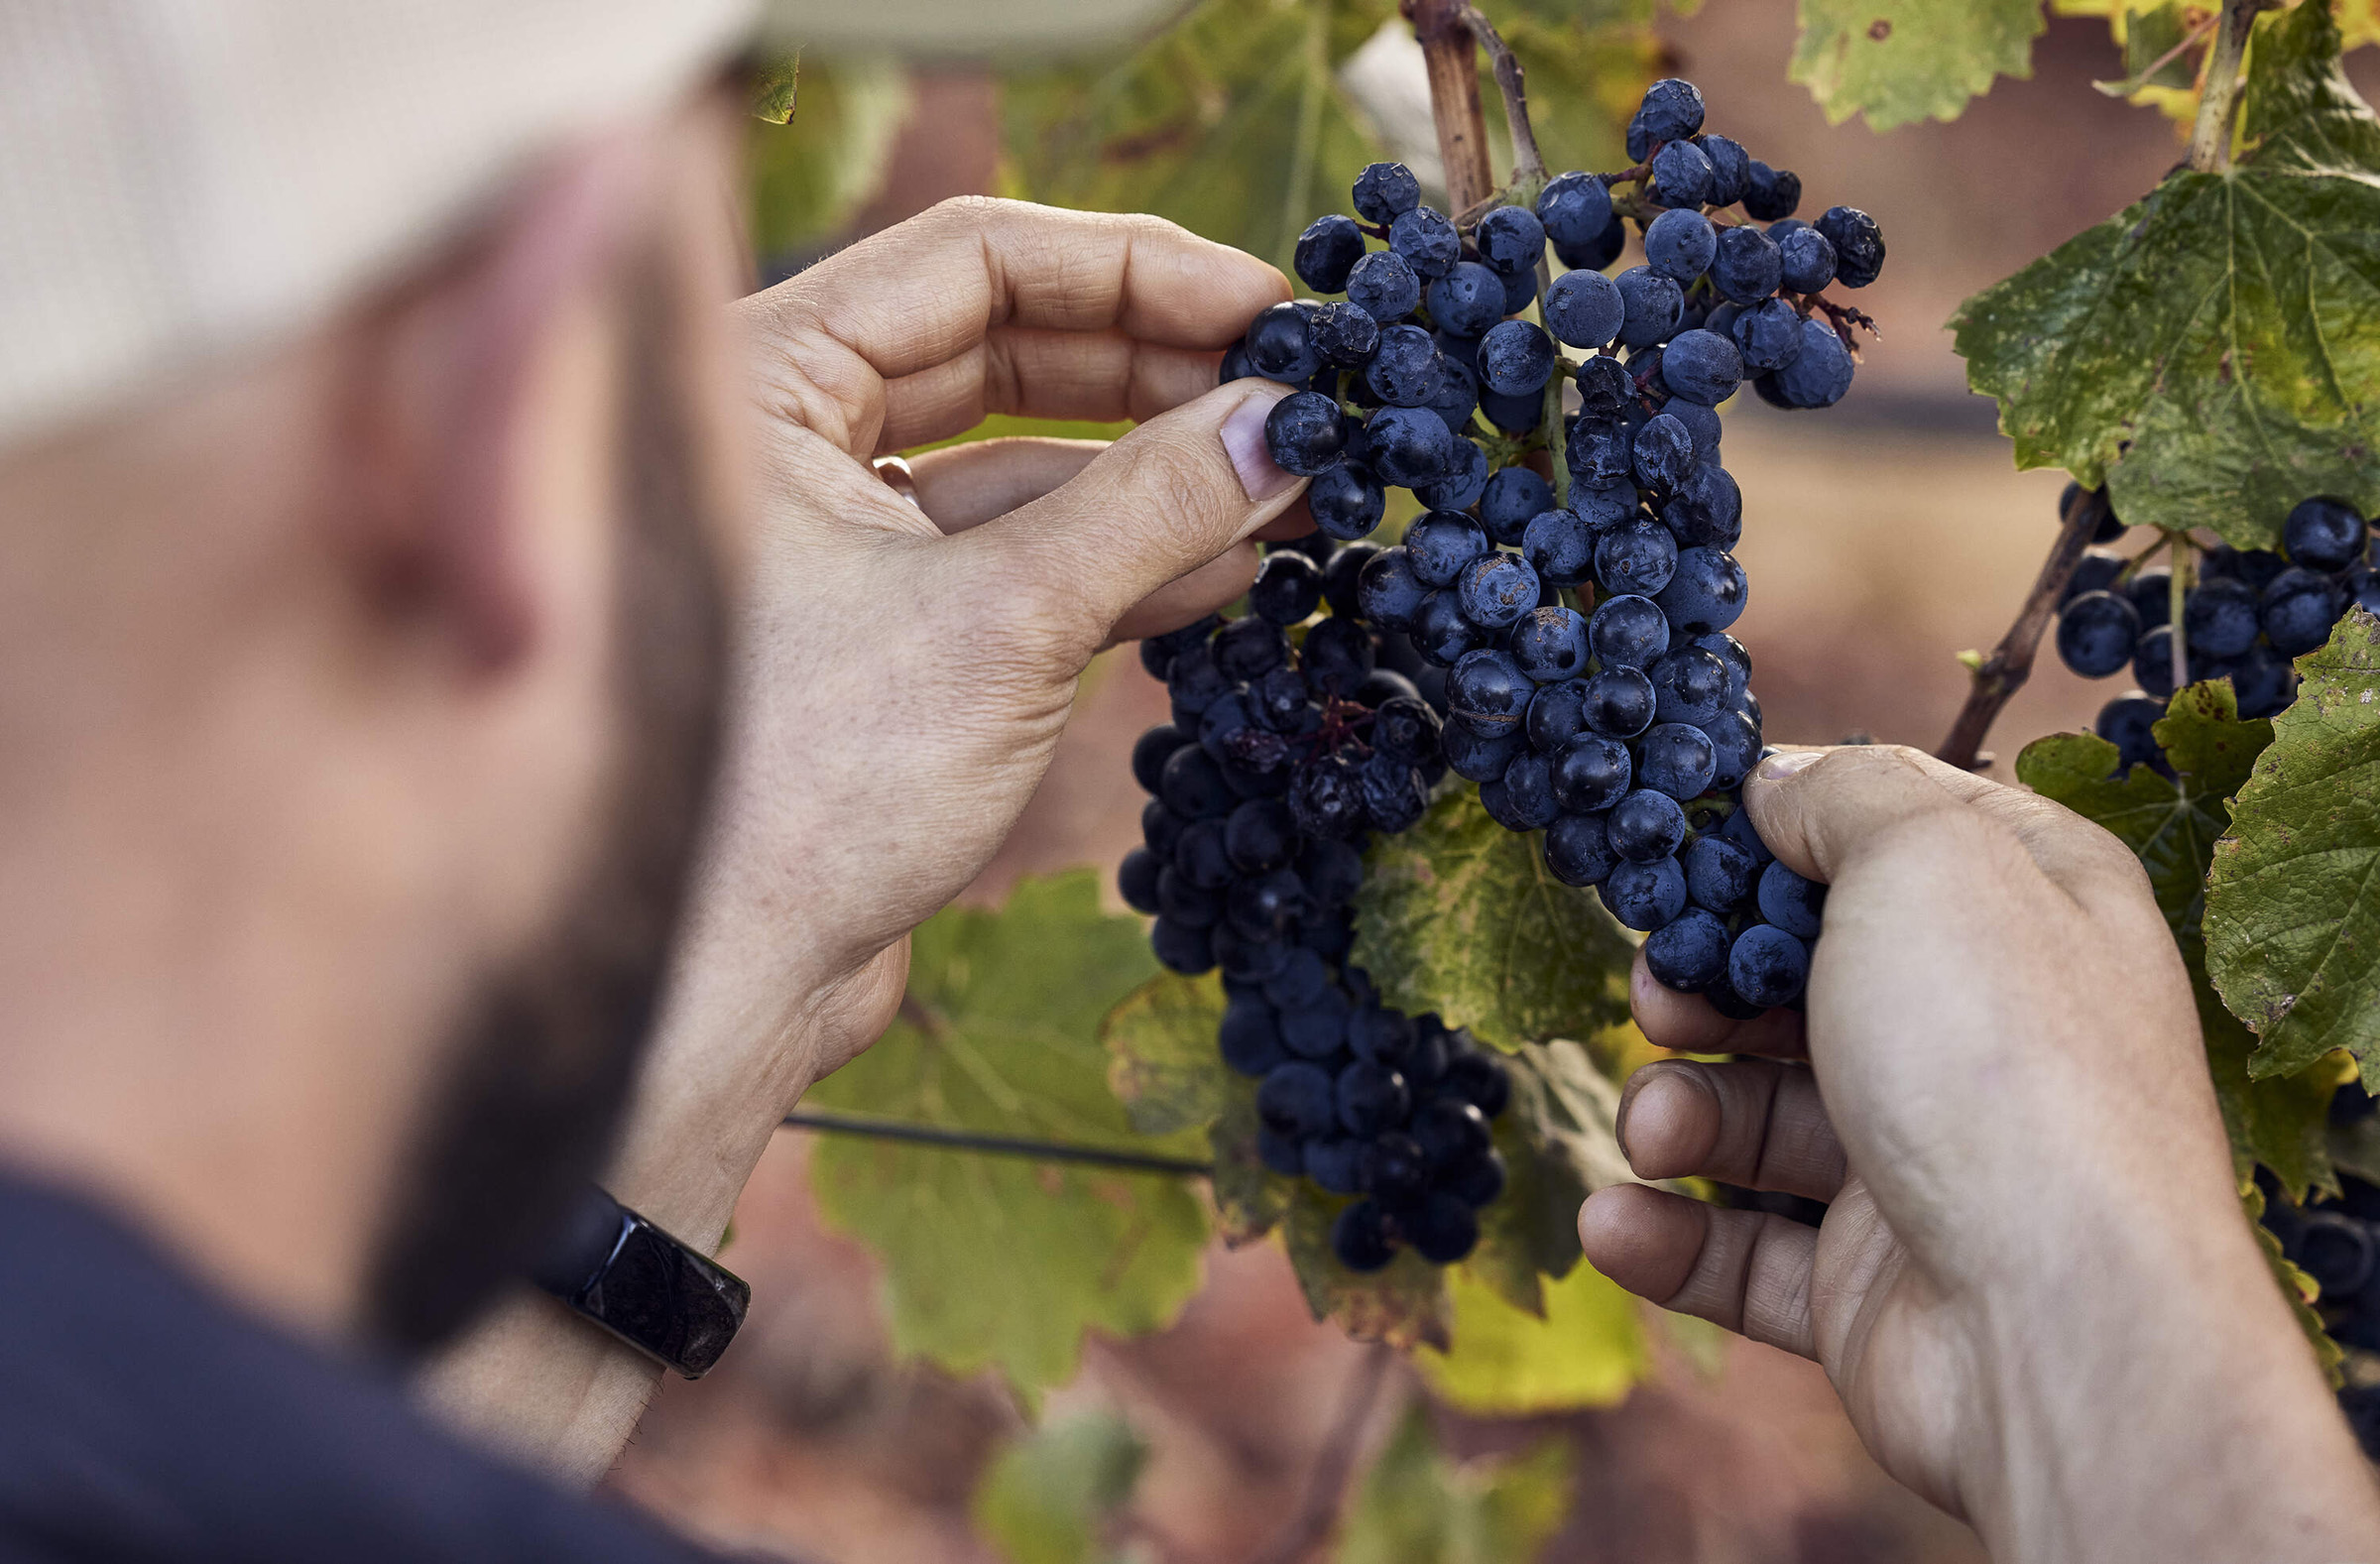 Person examining red grapes on the vine.